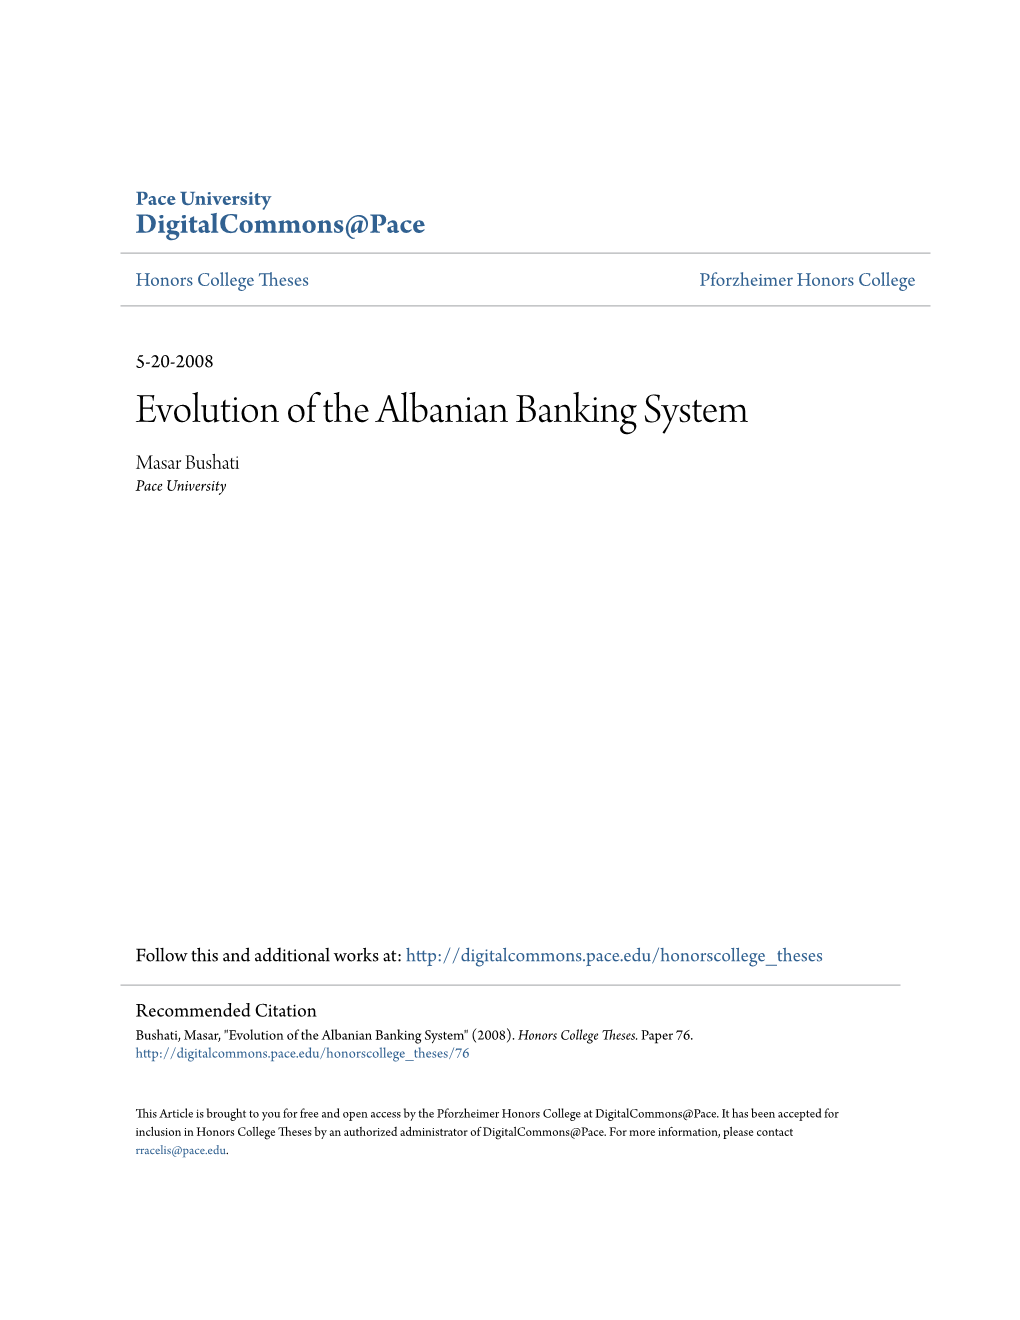 Evolution of the Albanian Banking System Masar Bushati Pace University